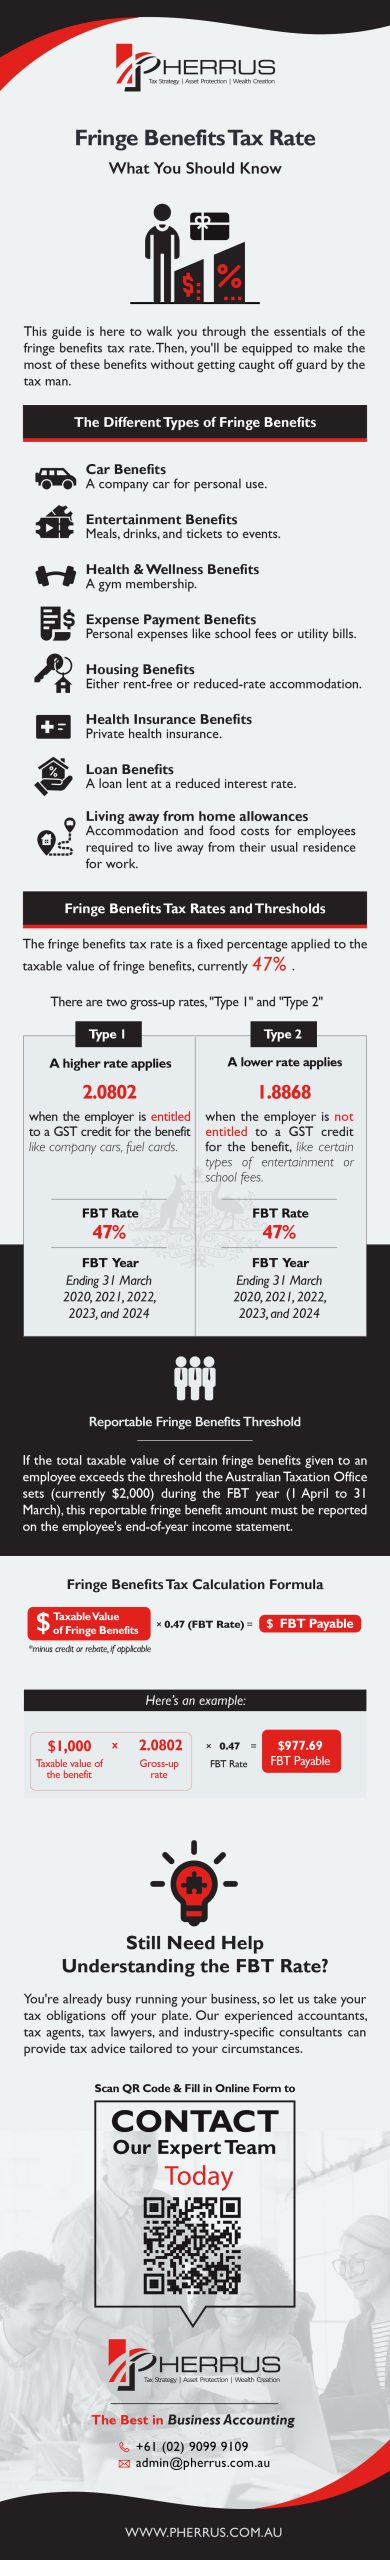 Fringe Benefits Tax Rate - Infographic